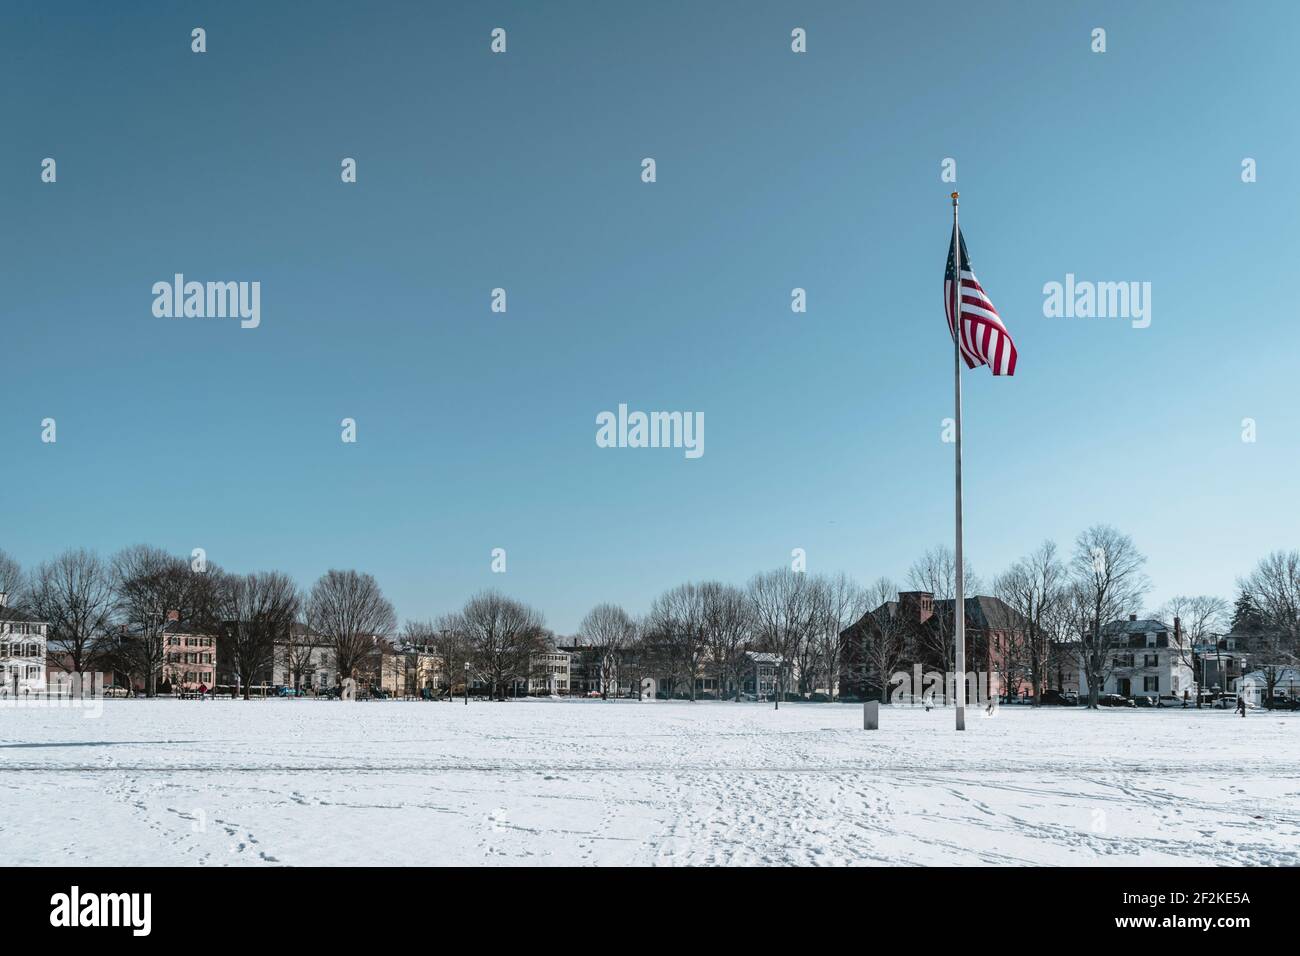 Winter in Witch City of Salem, Essex, New England, Boston, United States of America, Massachusetts, Flag of USA against Blue Sky Stock Photo